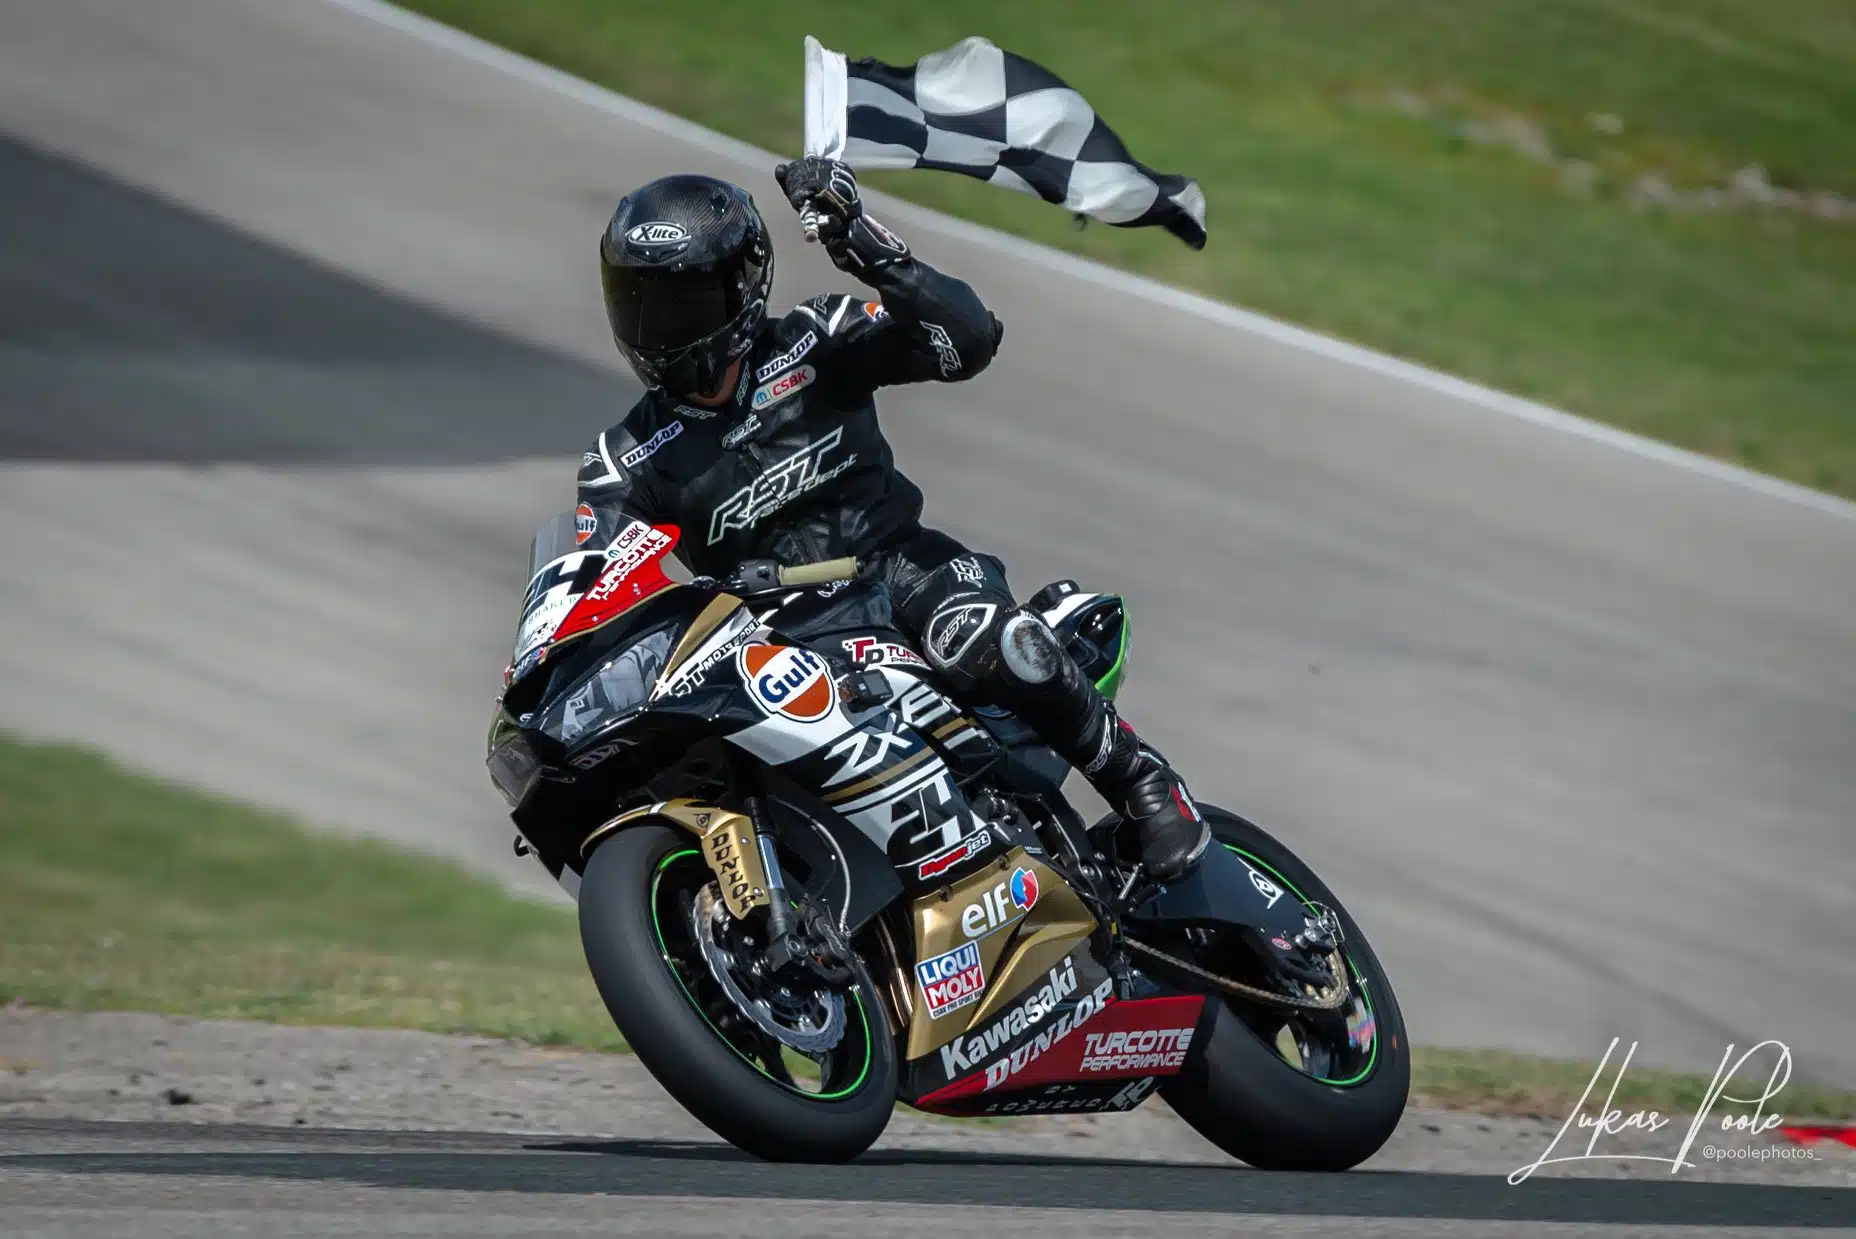 Sebastien Tremblay after a win at the Canadian Tire Motorsport Park in 2019.